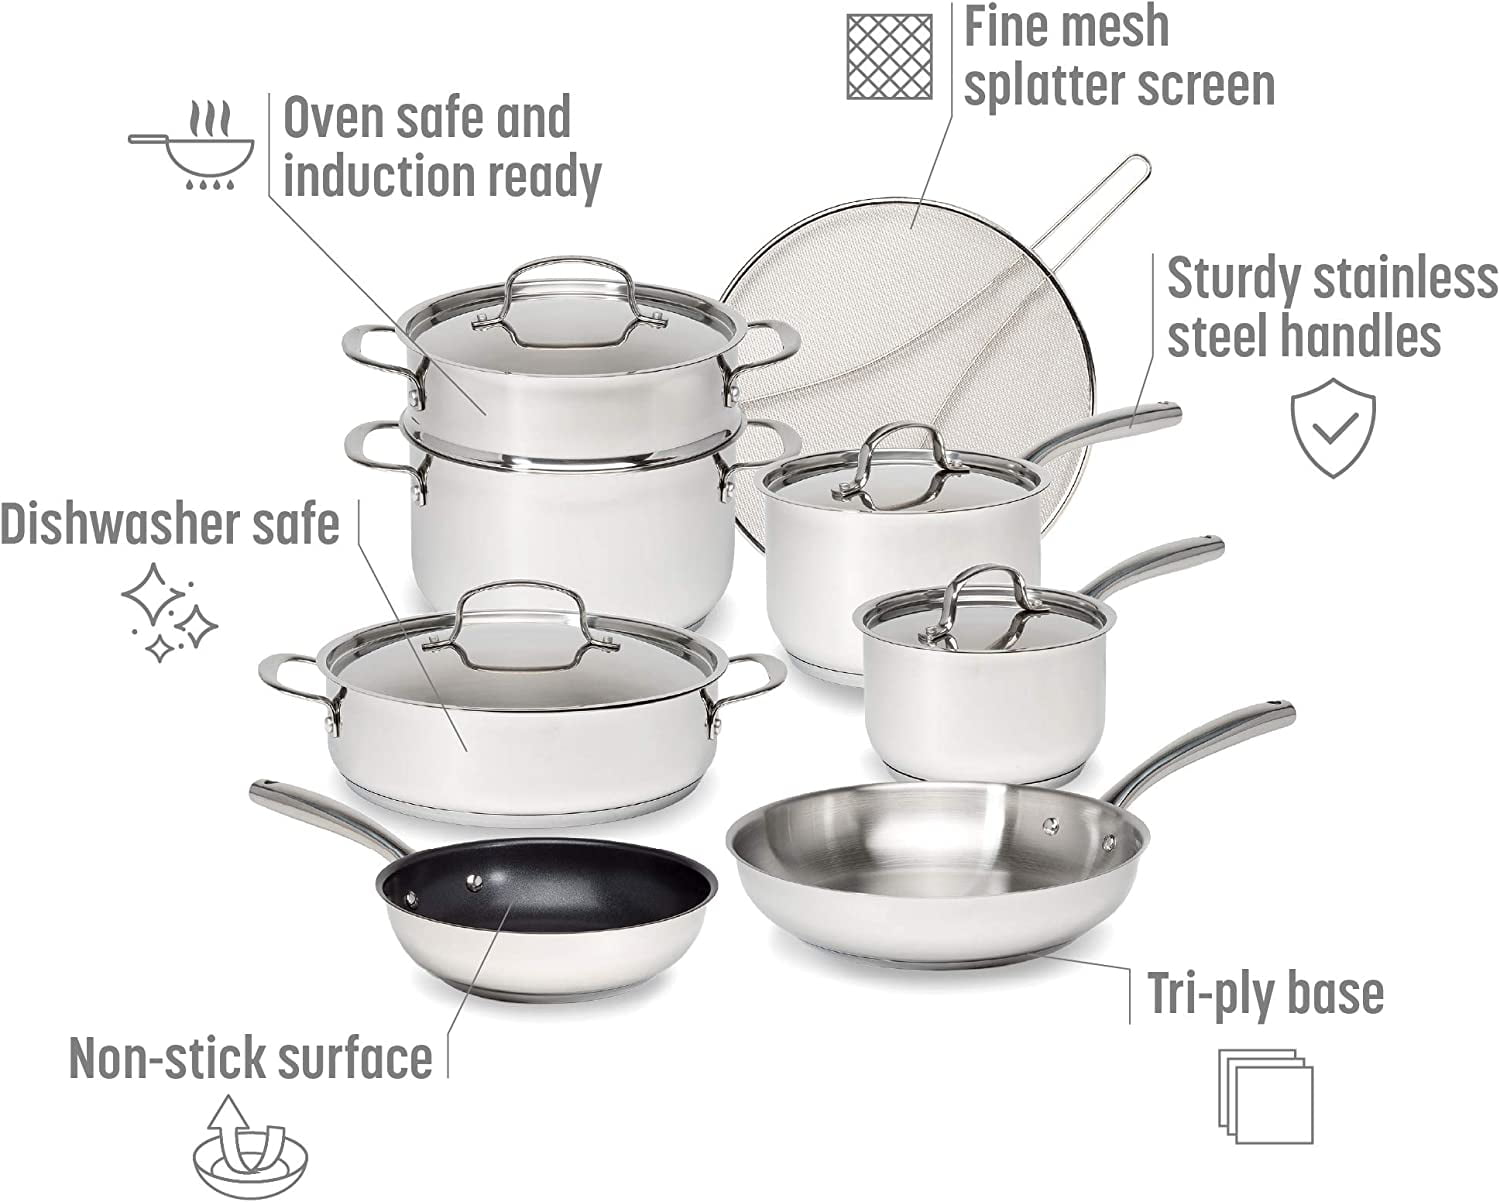 Goodful 12 Piece Cookware Set with Premium Non-Stick Coating, Dishwasher Safe Pots and Pans, Tempered Glass Steam Vented Lids